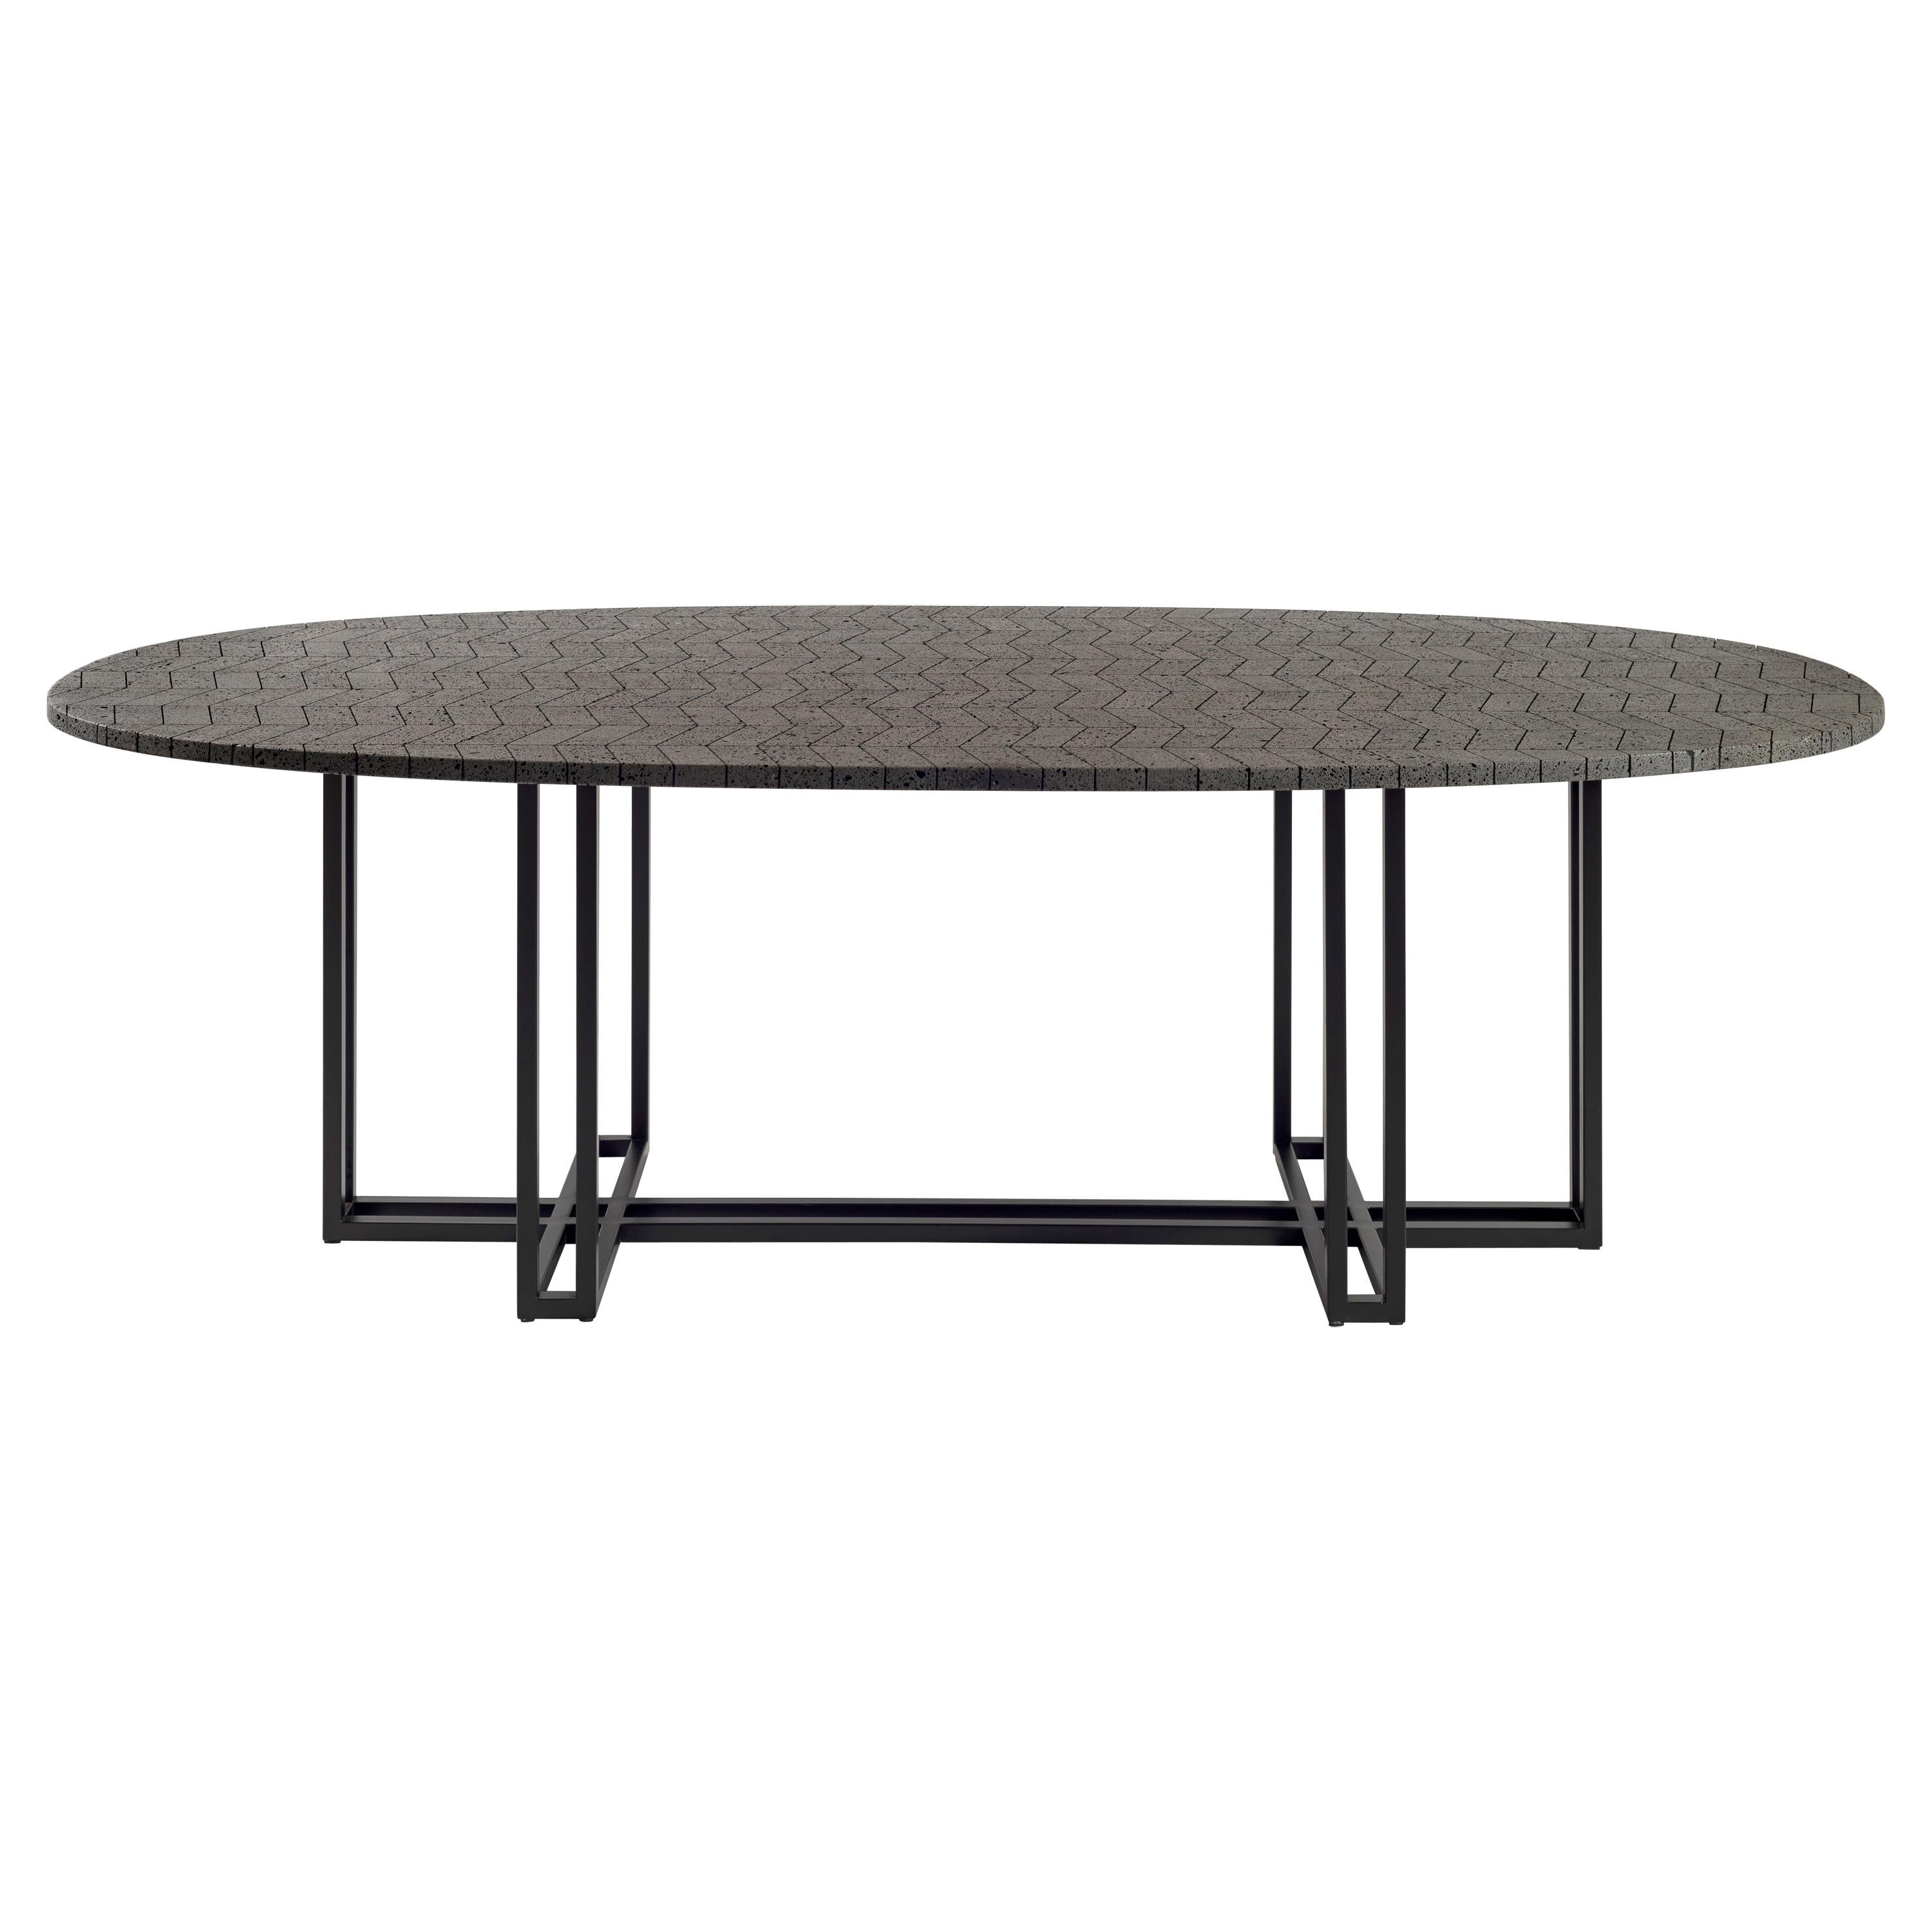 Lava Oval Table, Volcanic Stone and Stainless Steel 2.4M